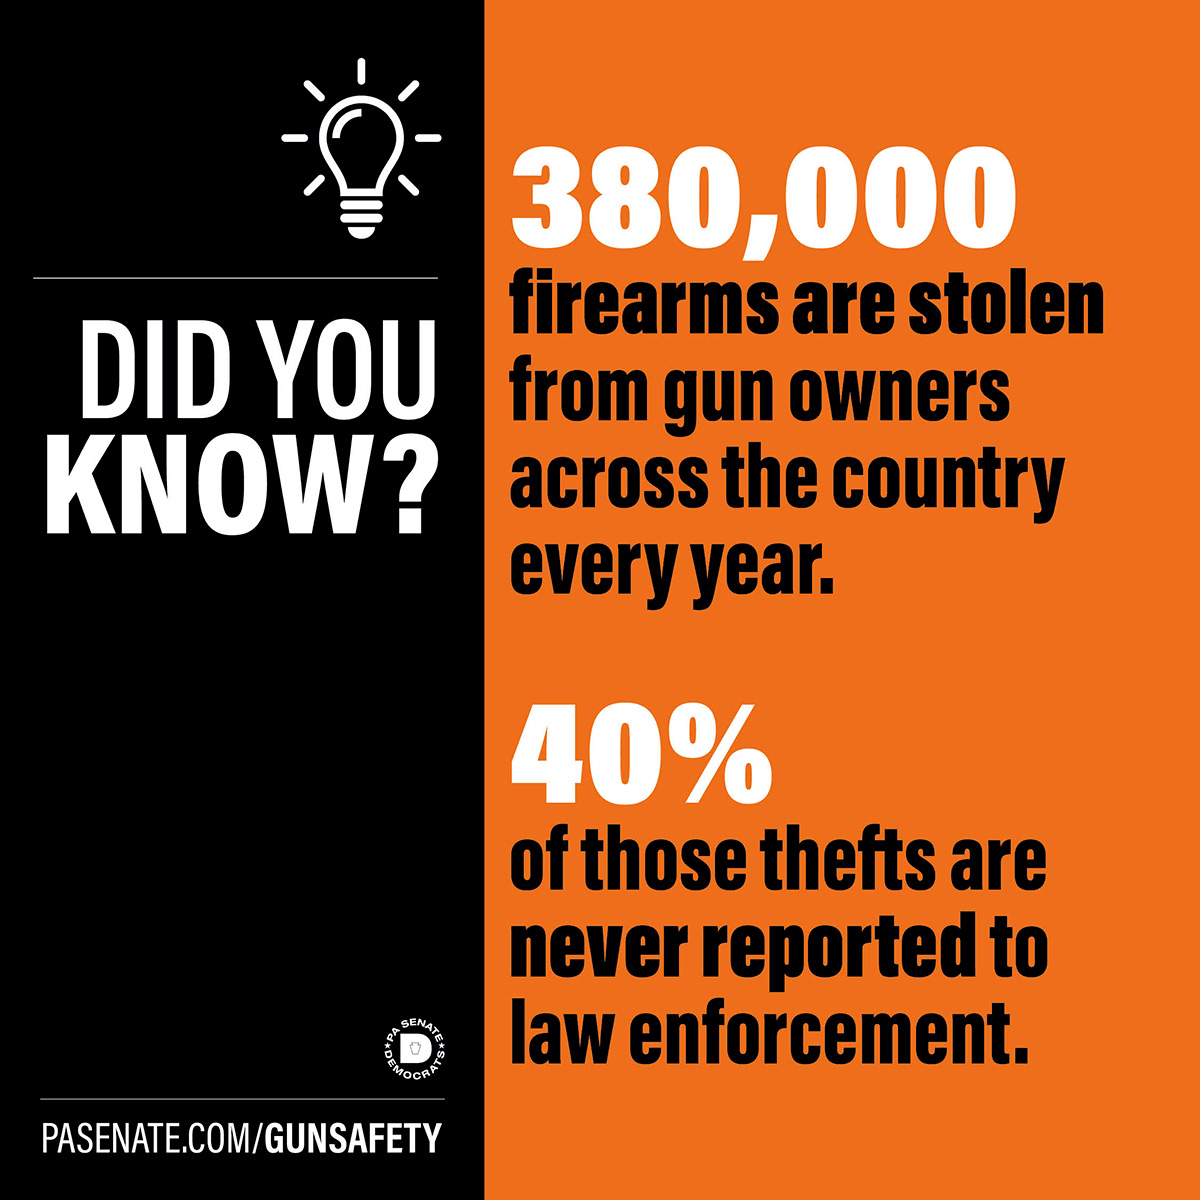 Did you know? 380,000 firearms are stolen form gun owners across the country every year.